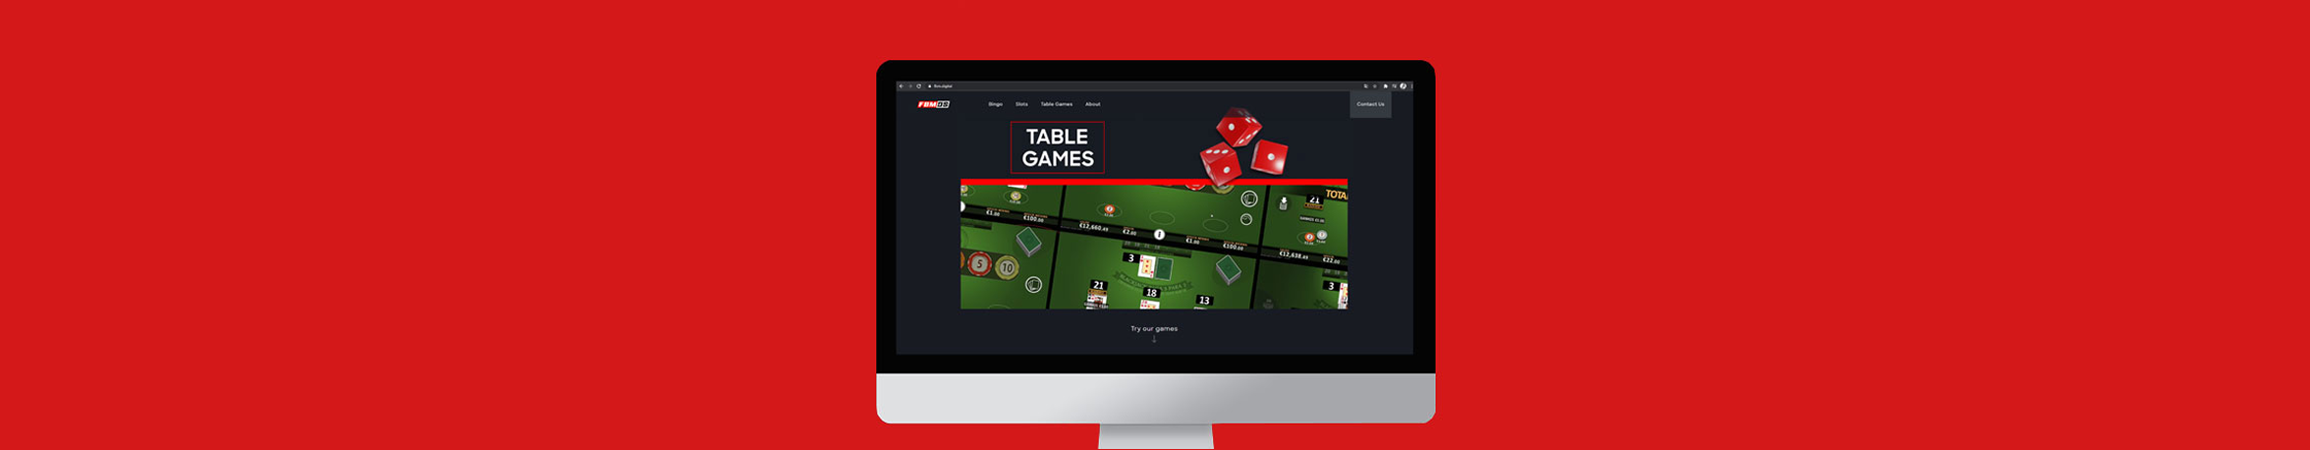 FBM Digital Systems website: a novelty with 20 online casino games to try!